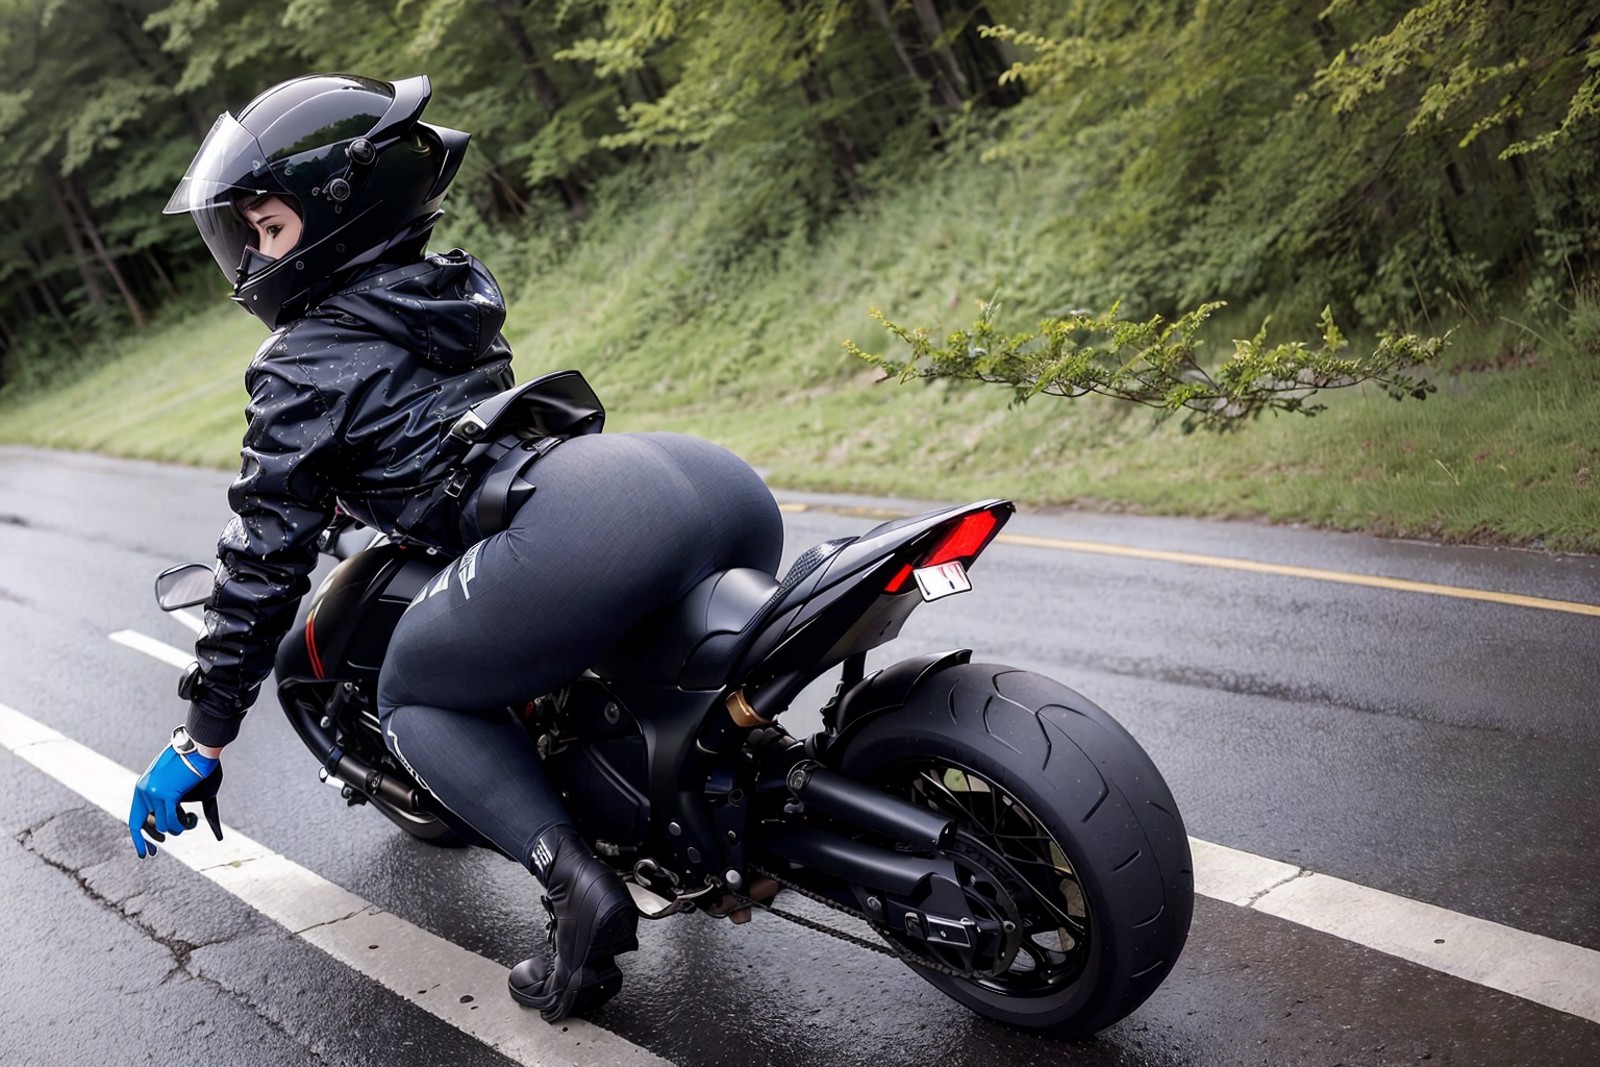 low stance, rainy weather:1.2, fully covered helmet, closed - up, on a wet road, 175 tall woman, huge tits:1.2, huge ass, ...